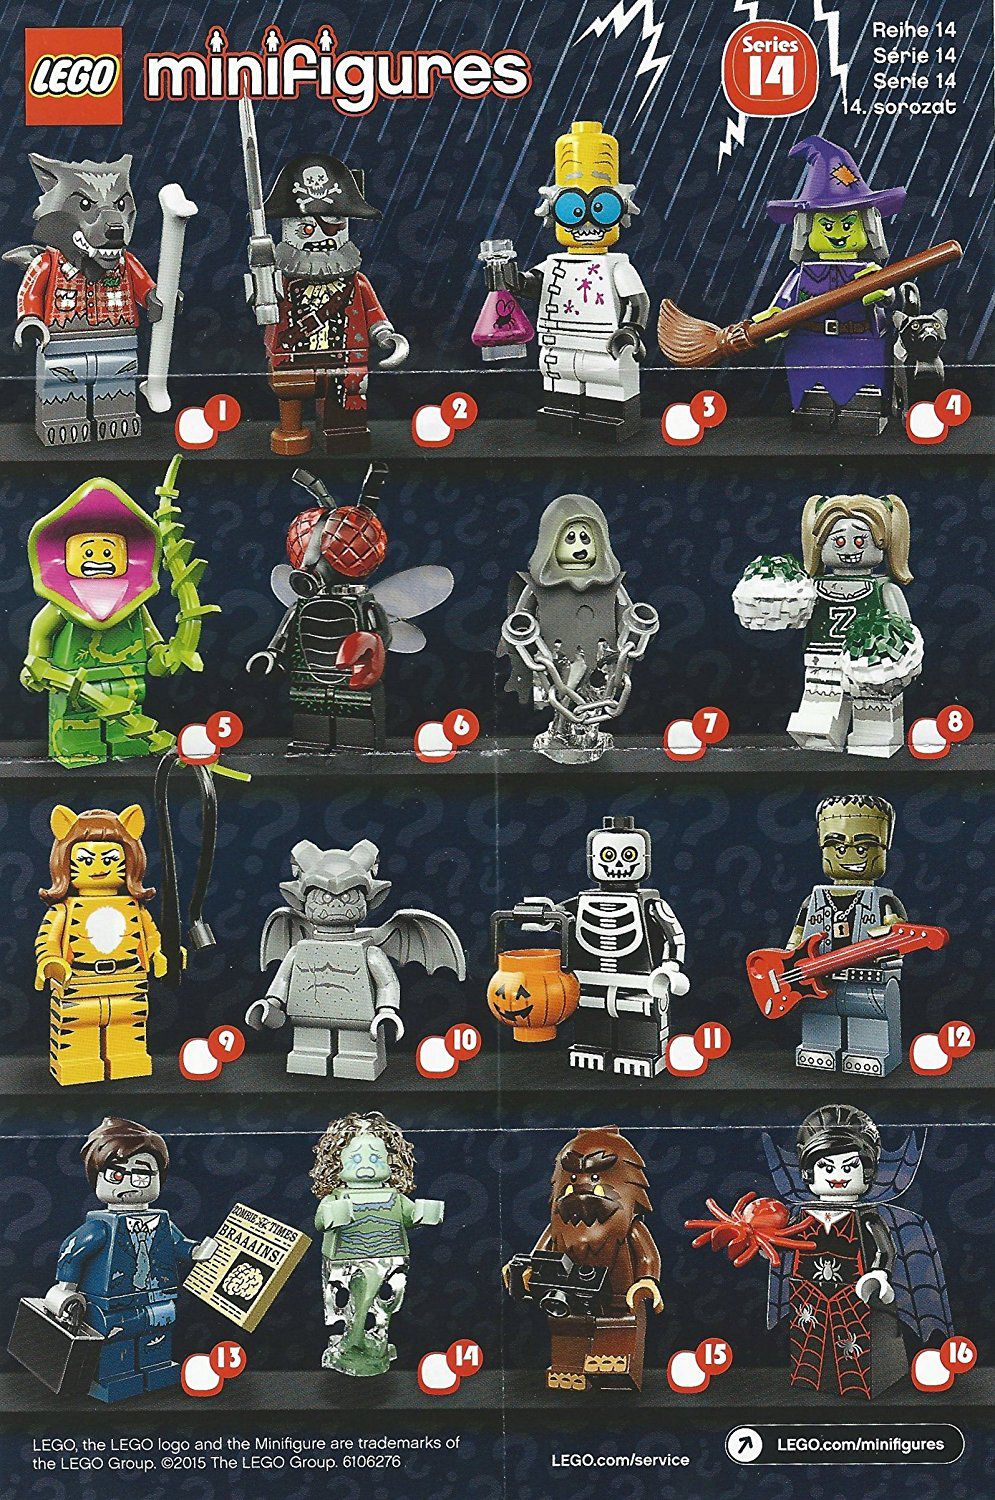 LEGO 71010 MINIFIGURES SERIES 14 ZOMBIE PIRATE #2 opened packet